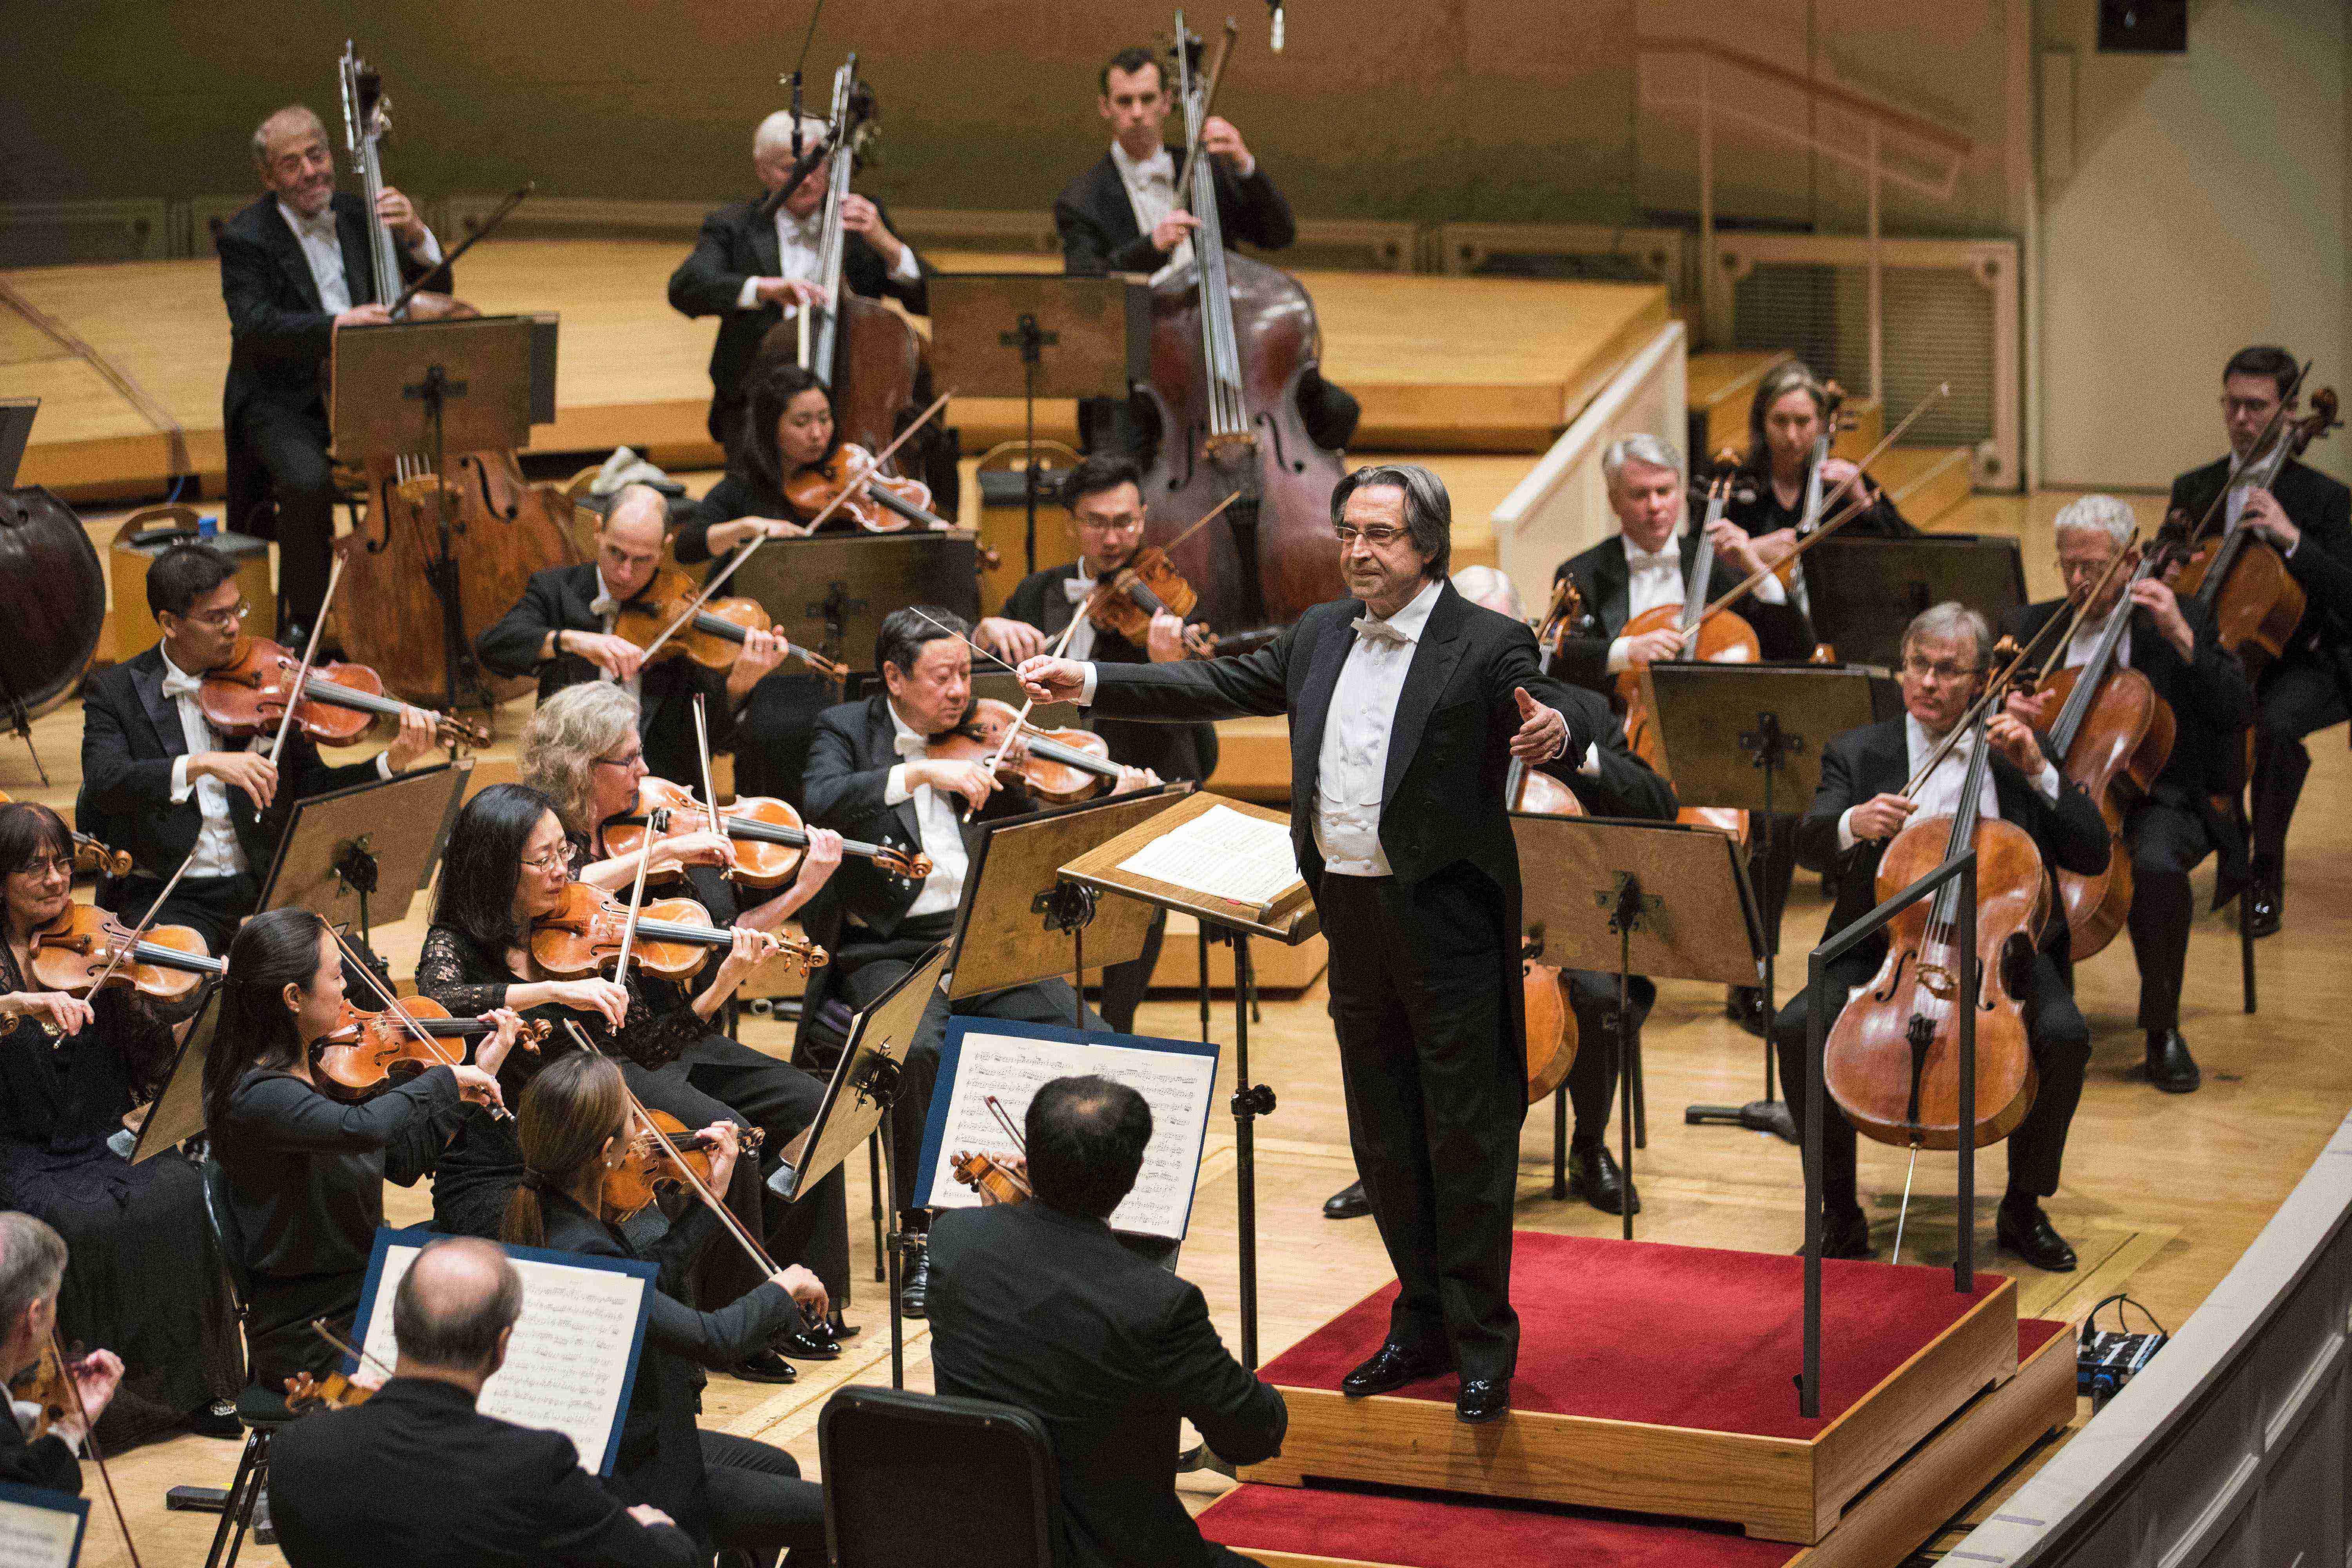 Music Director Riccardo Muti leads the CSO in Mozart’s “Symphony No. 36” on March 15, 2018. (Credit: Todd Rosenberg Photography)